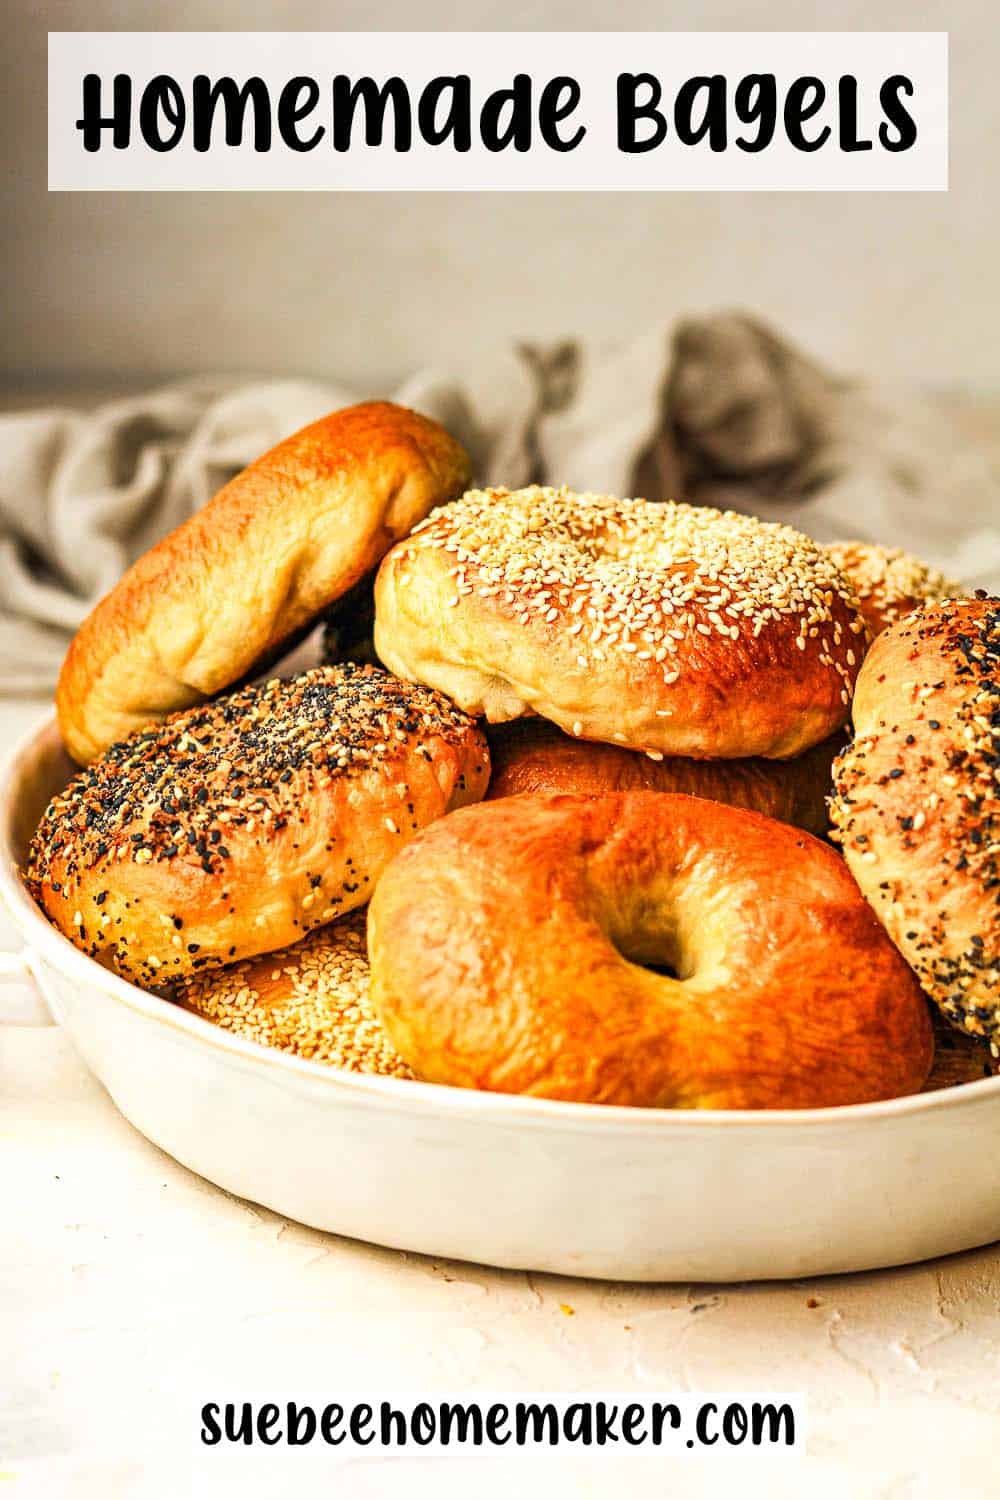 Side view of a bowl of homemade bagels with various toppings.